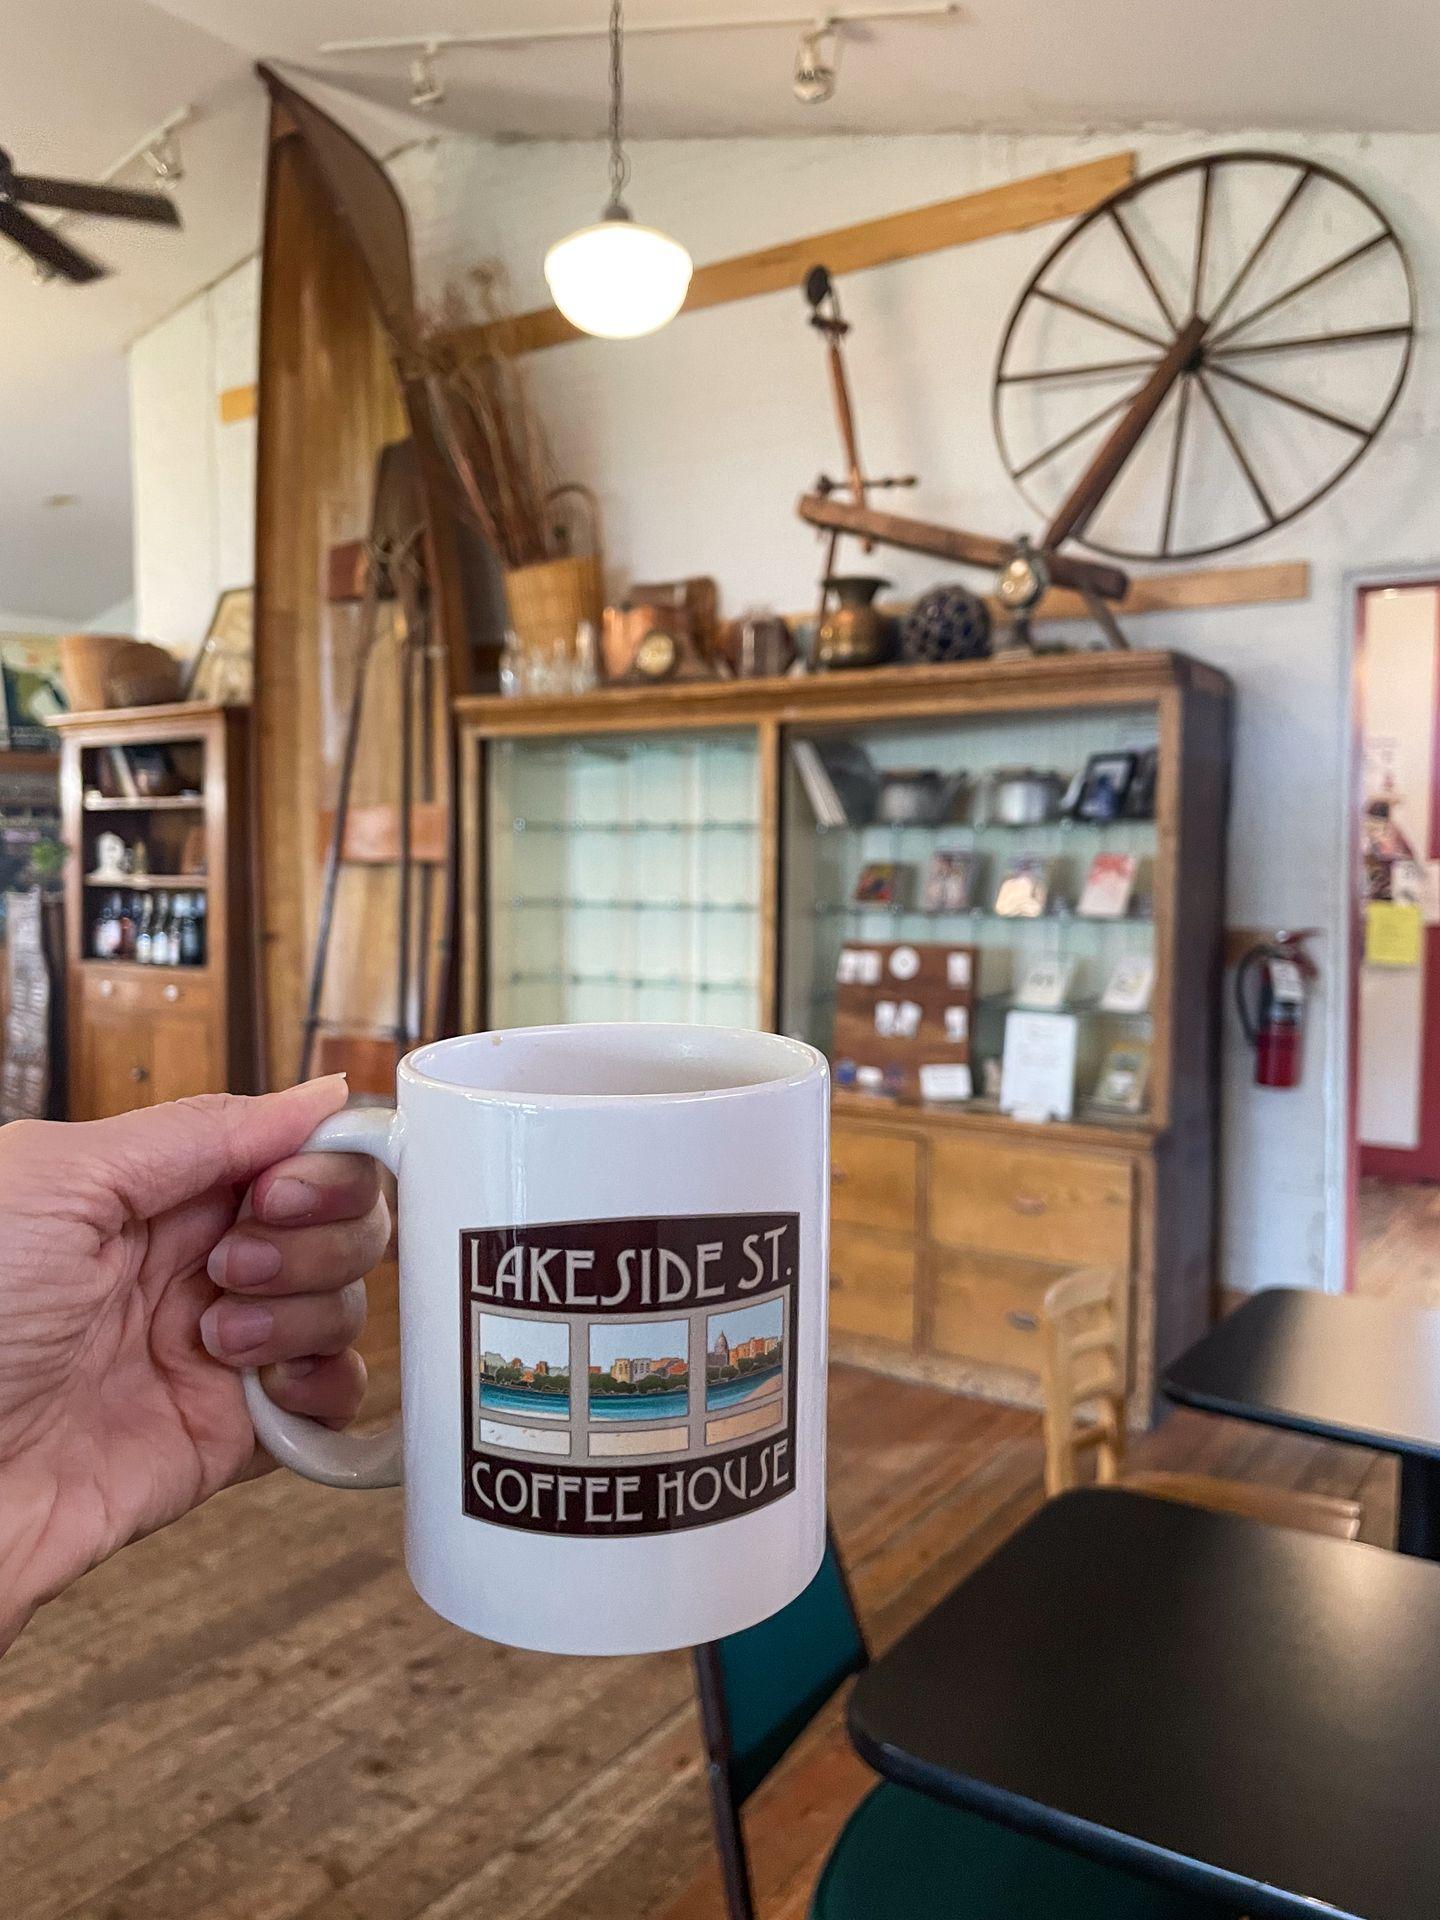 Holding up a coffee mug at Lakeside Coffee. The mug reads 'Lakeside St Coffee House' and has an artistic rendering of the windows in the coffee shop.